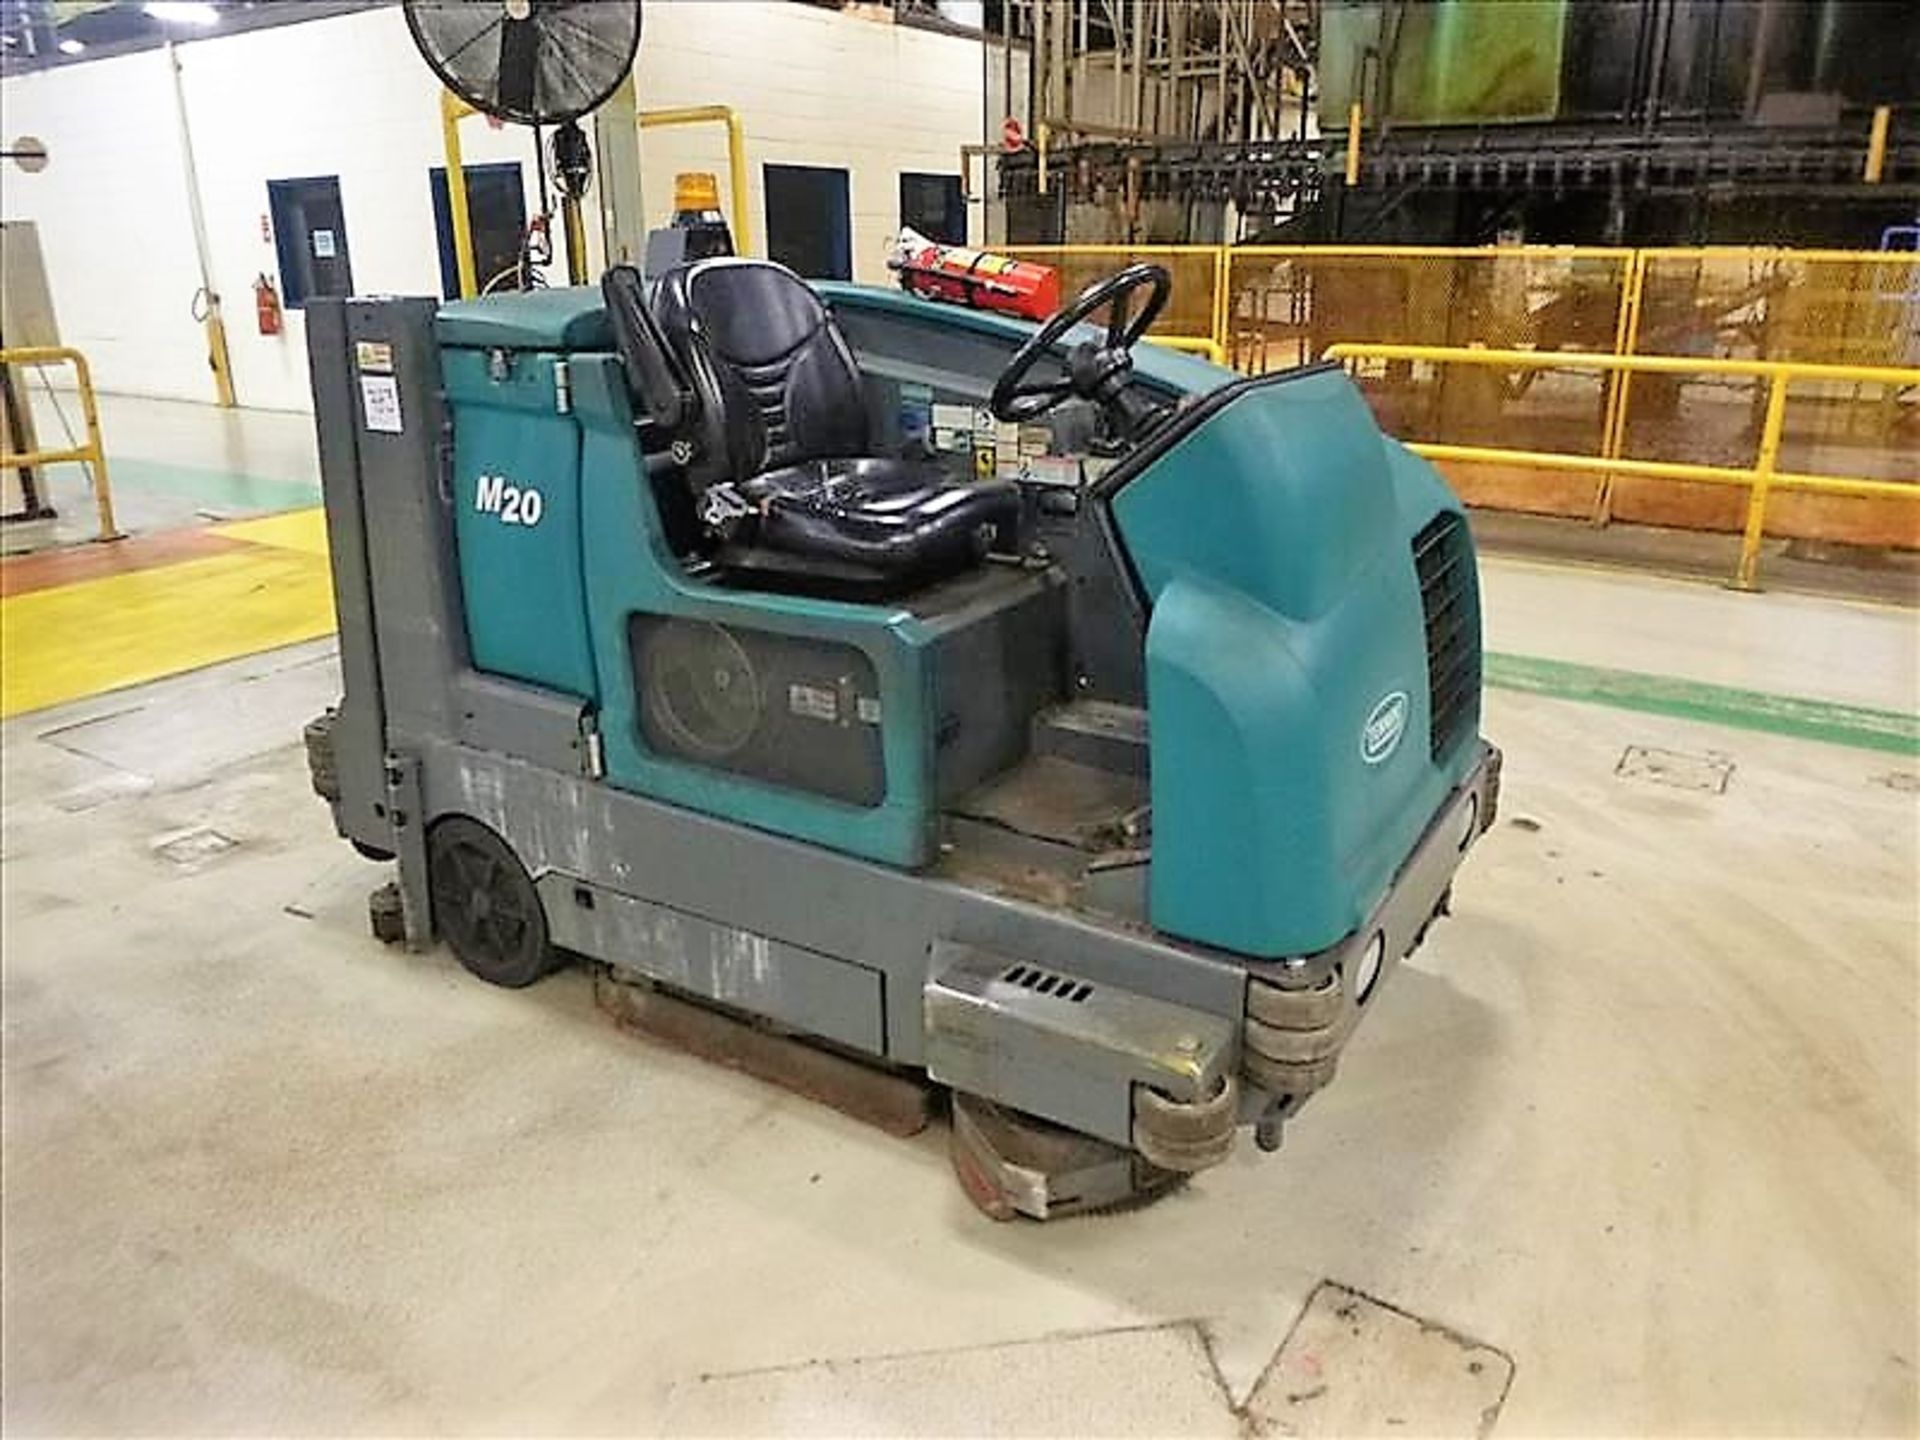 2013 TENNANT M20 Elec Sweeper/Scrubber, s/n M20-6016, Meter Reads 5944 hrs. - Image 2 of 14